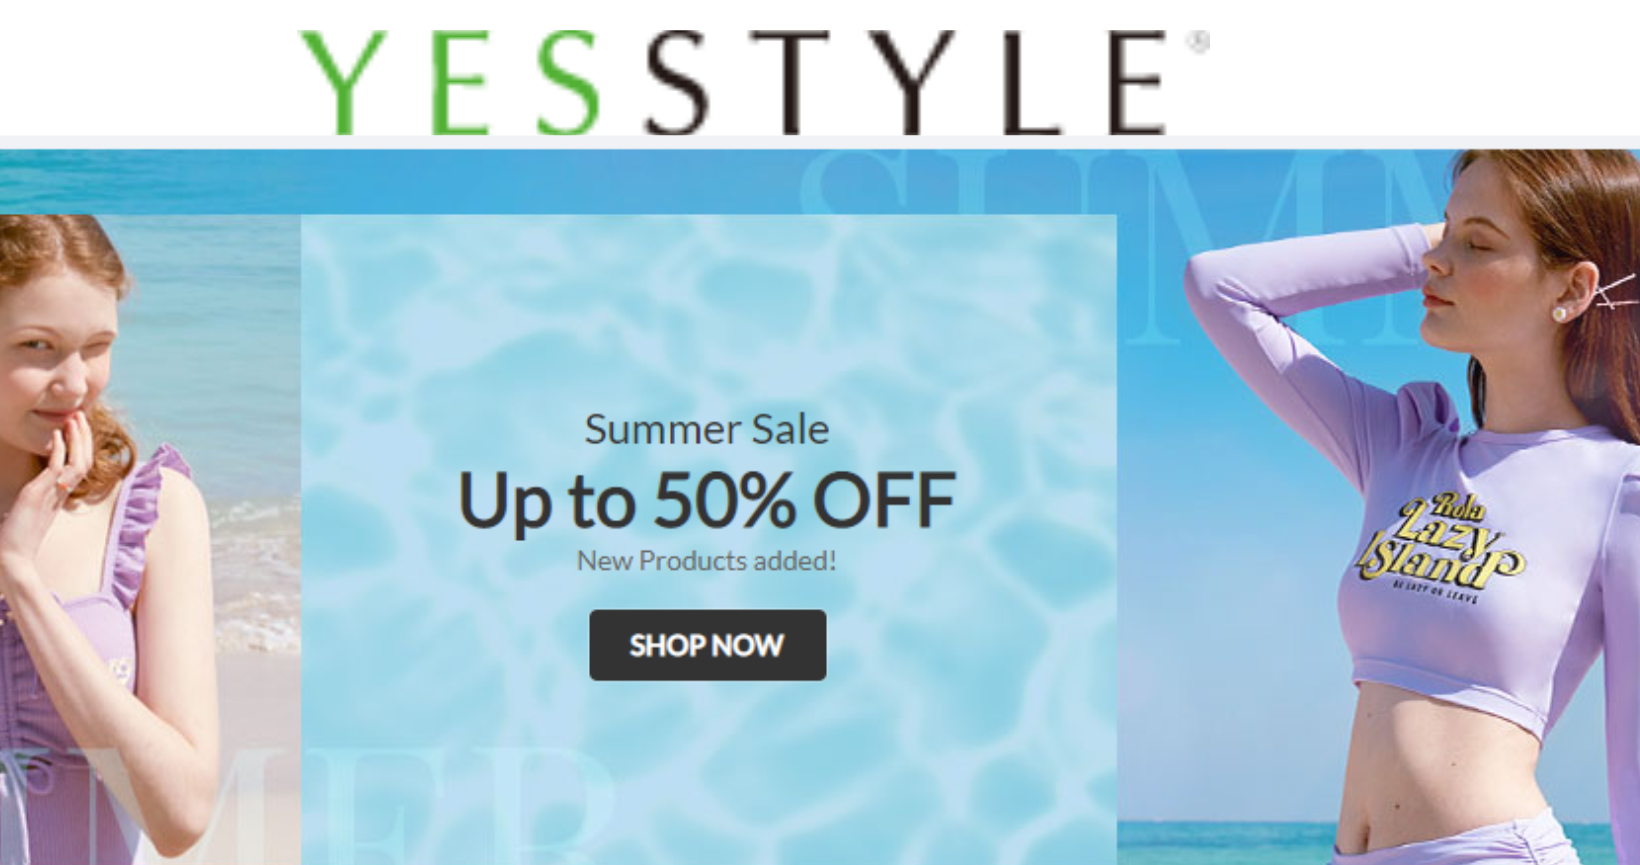 Don’t Miss the YesStyle Sale – Get Your Fashion Fix Now!